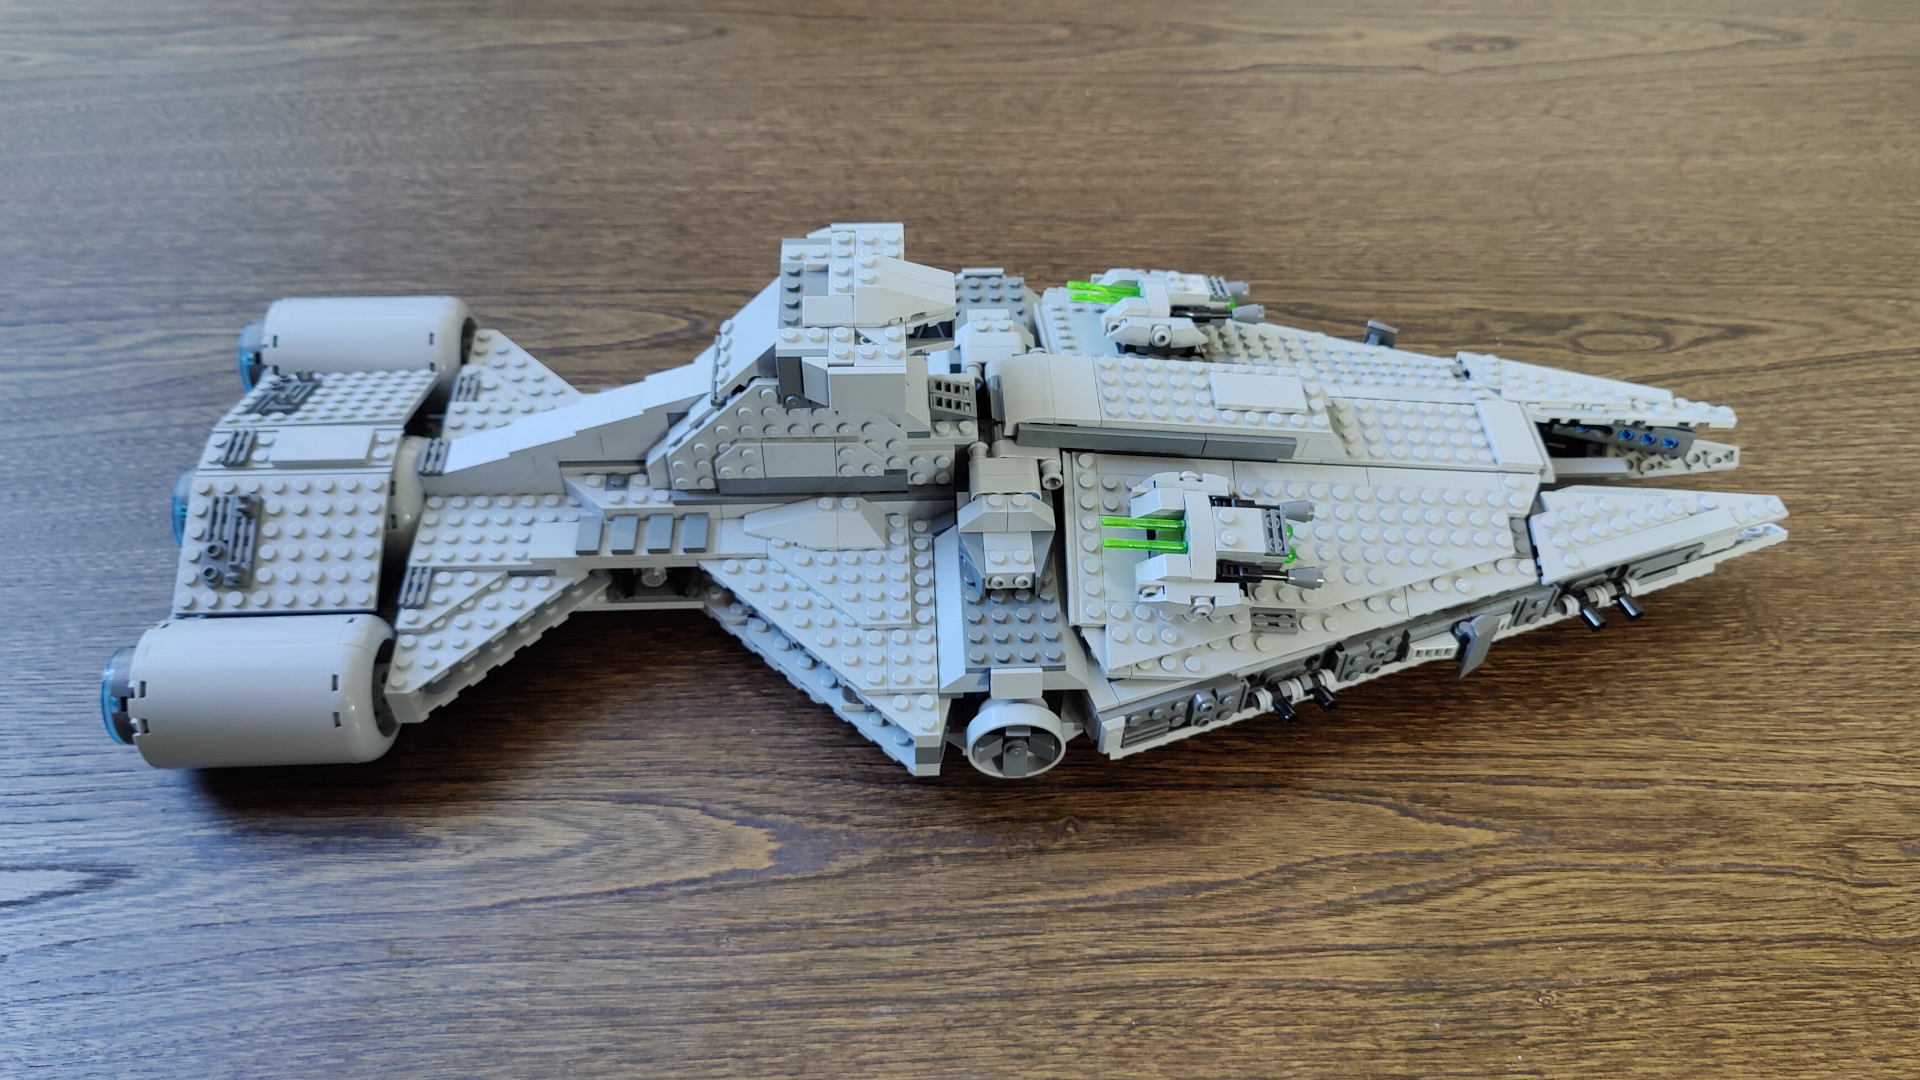 Let's talk about the LEGO Star Wars UCS Venator reveal